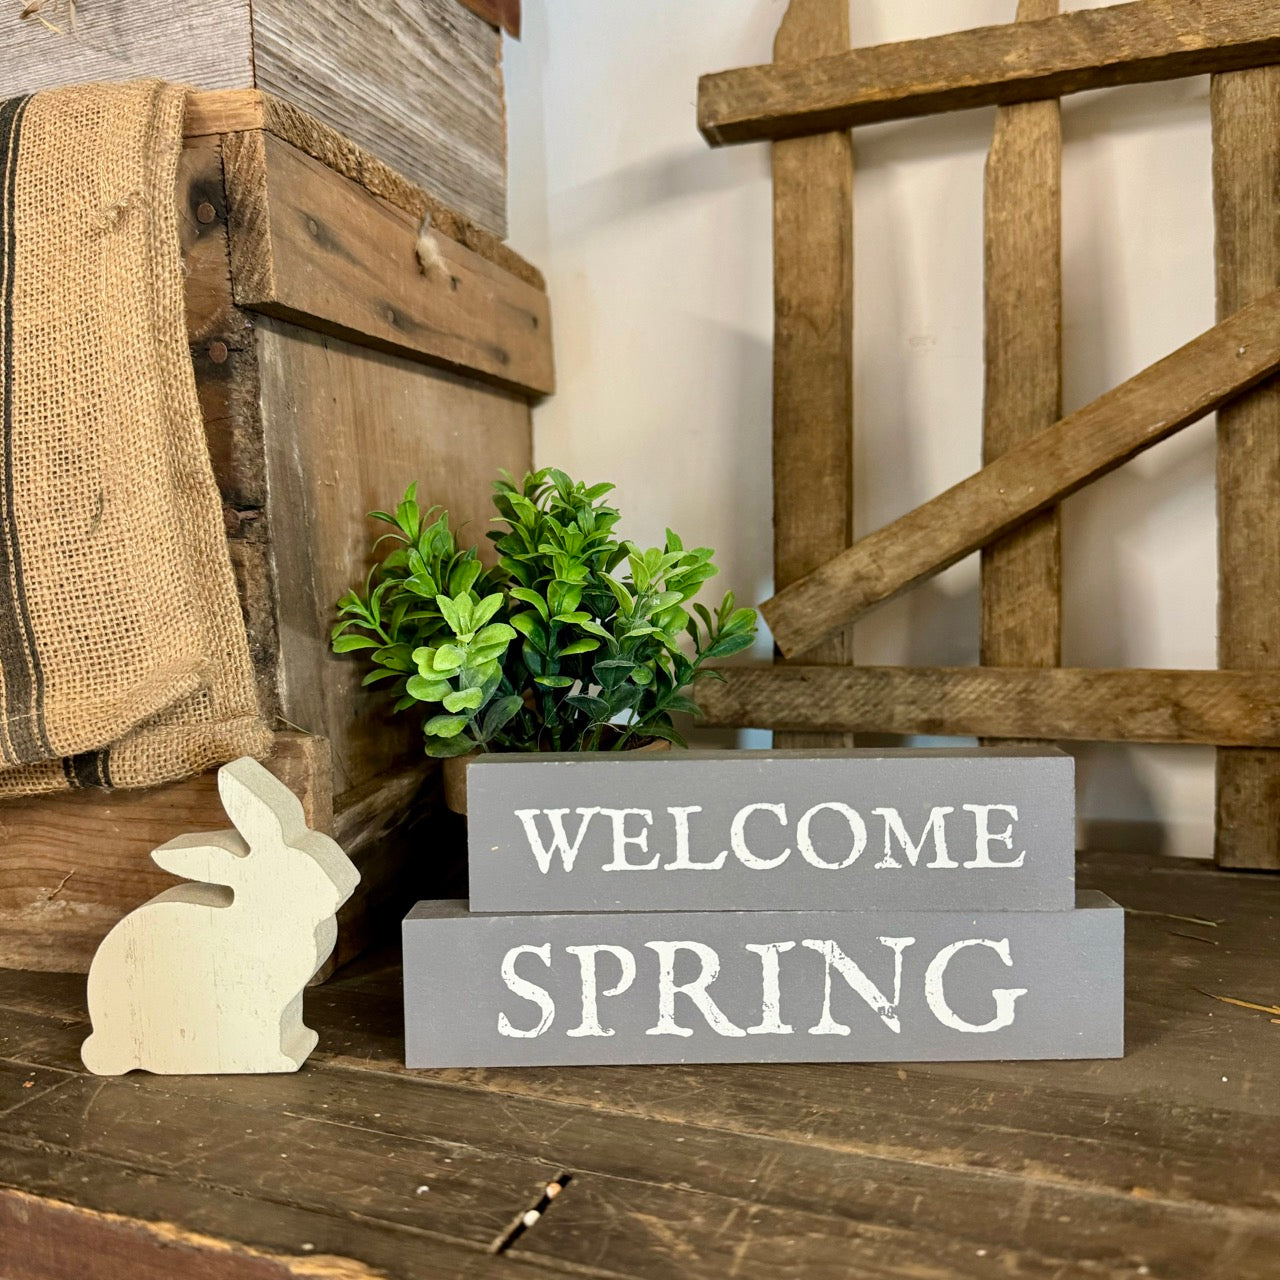 Welcome Spring - Stacking Blocks Country Decor, Decor, Farmhouse Decor, Farmhouse Decorating, Farmhouse Spring Decor, Farmhouse Spring Decorating, New, Spring, Spring Decor, Spring Decorating, Spring Farmhouse Decor, Spring Home Decor 